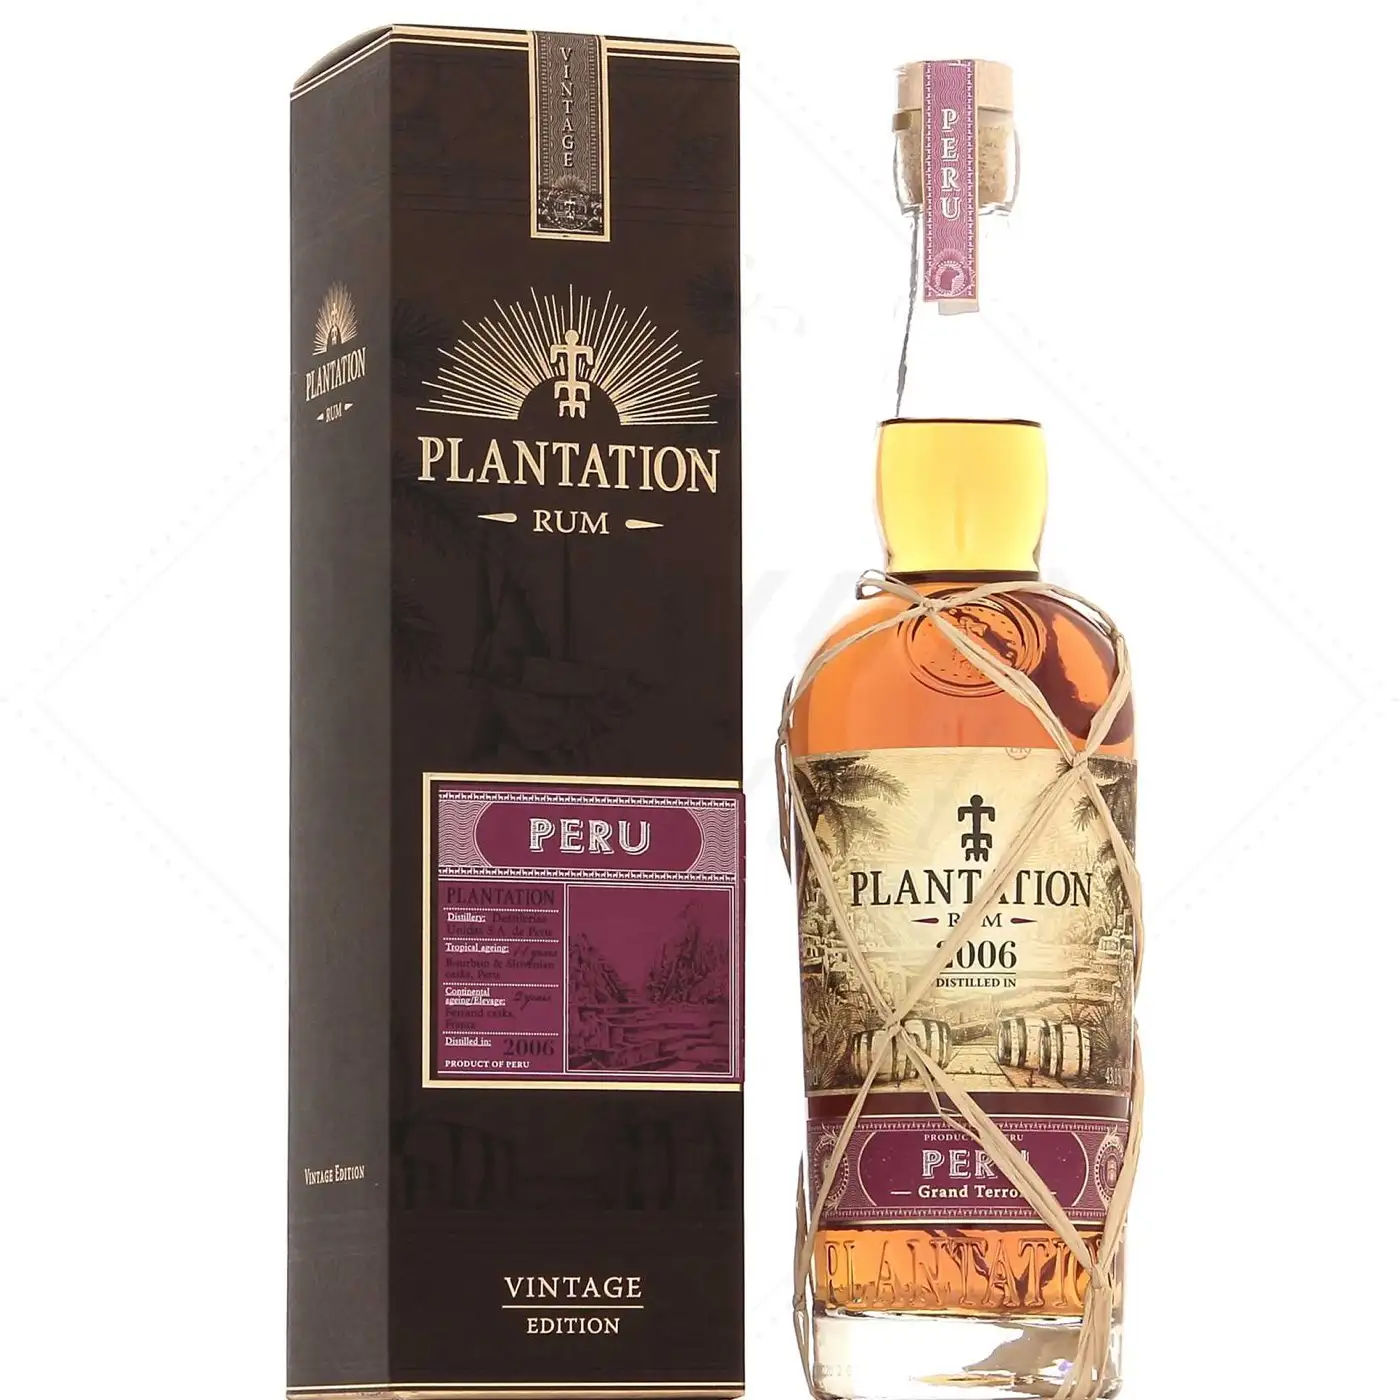 Image of the front of the bottle of the rum Plantation Peru